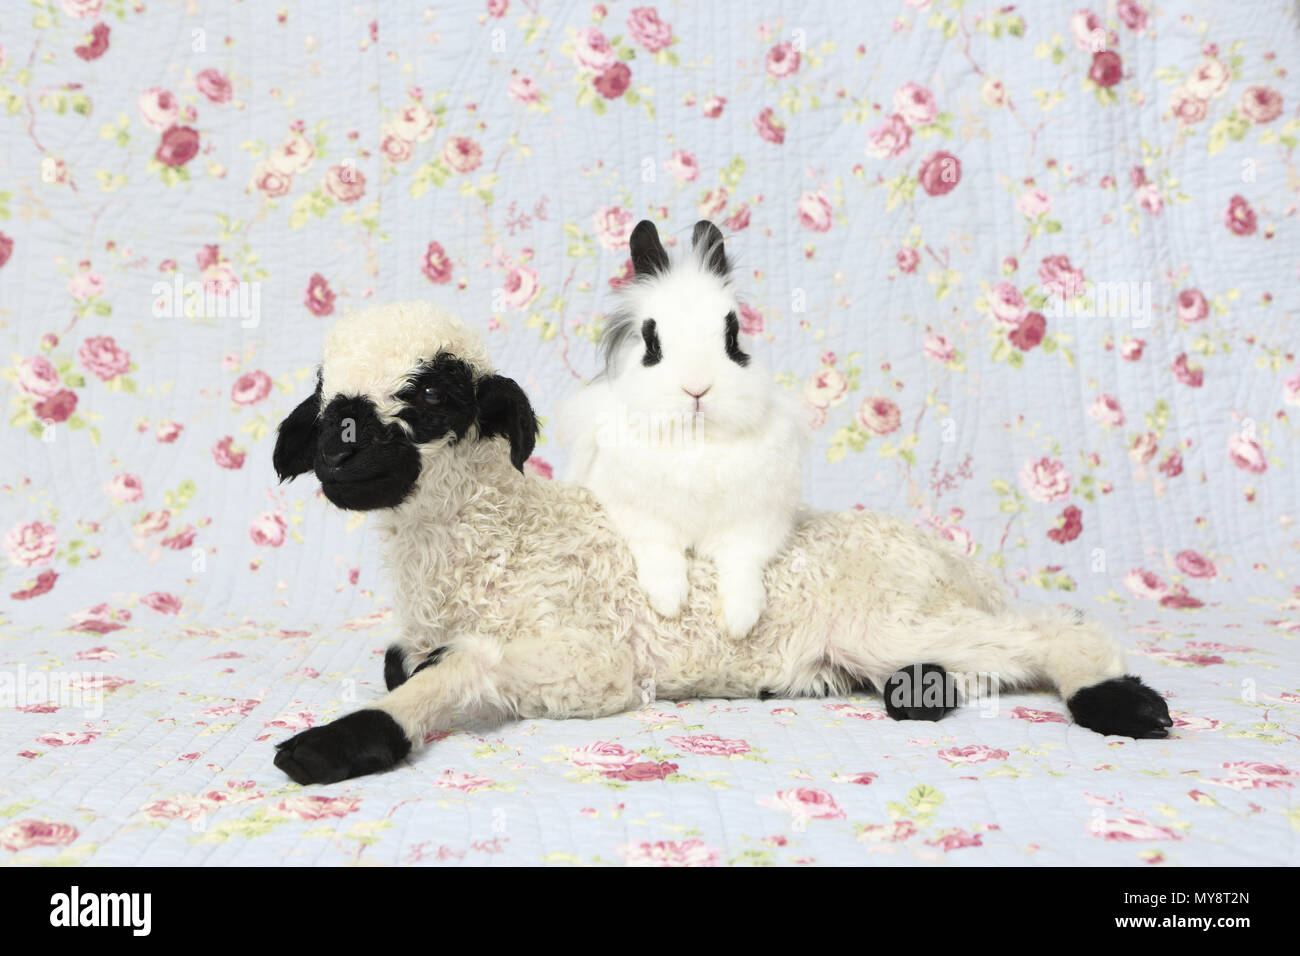 Valais Blacknose Sheep. Lamb (10 days old) and Dwarf Teddy Rabbit next to each other. Studio picture against a blue background with rose flower print. Germany Stock Photo